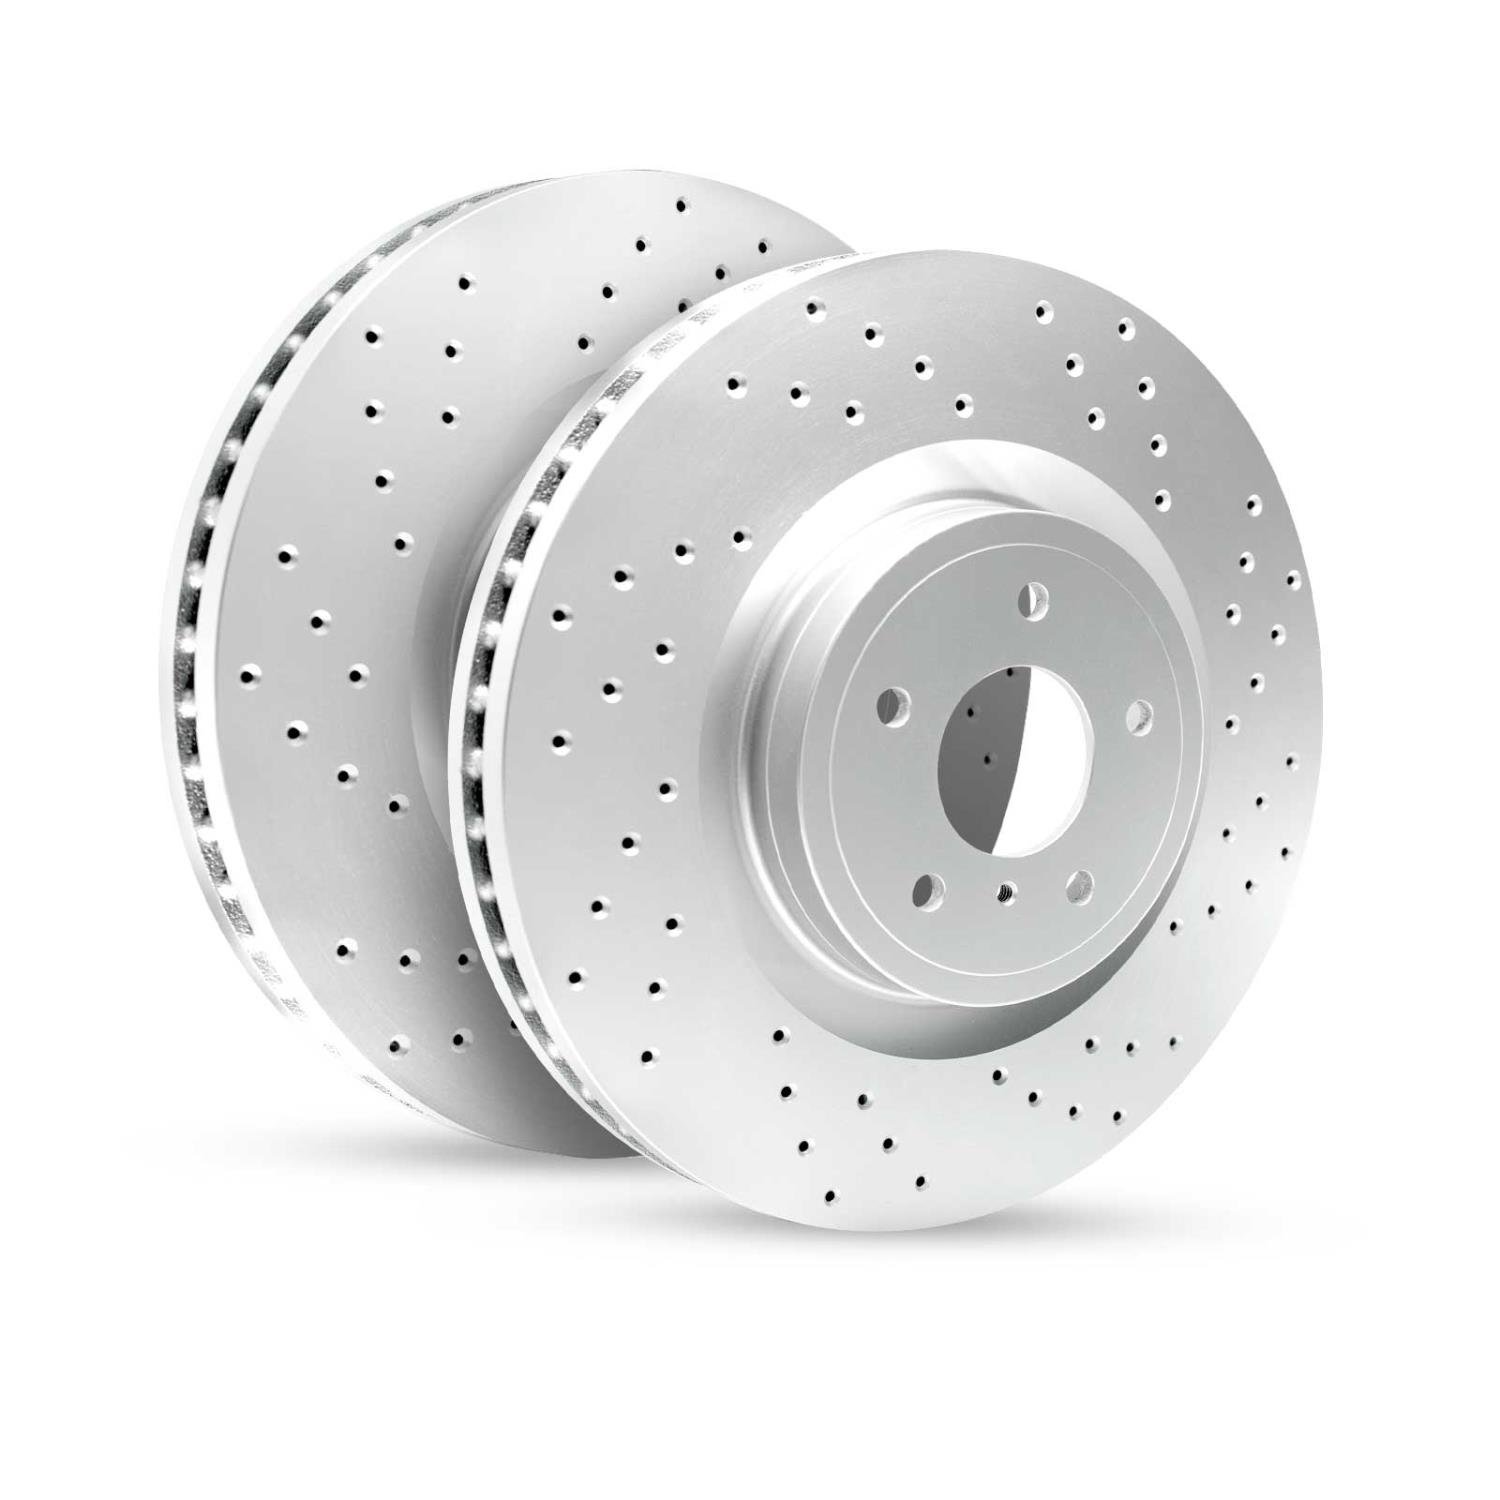 GEO-Carbon Drilled/Slotted Rotors, 2010-2013 Suzuki, Position: Front